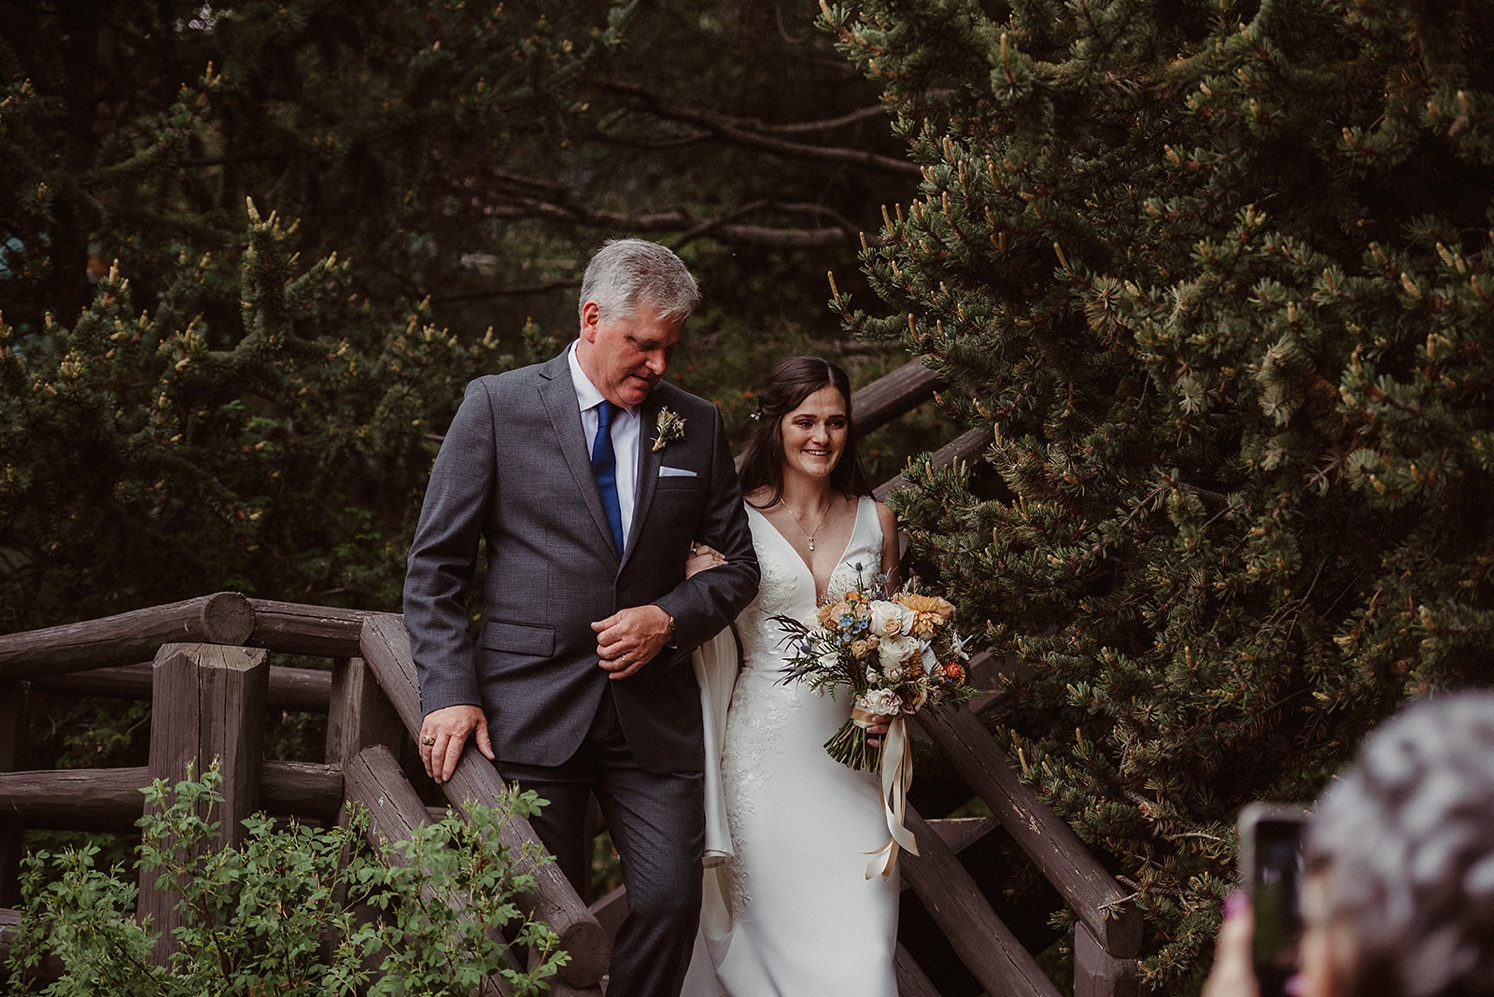 Walking down steps to ceremony space with father at Colorado Airbnb Wedding | McArthur Weddings and Events